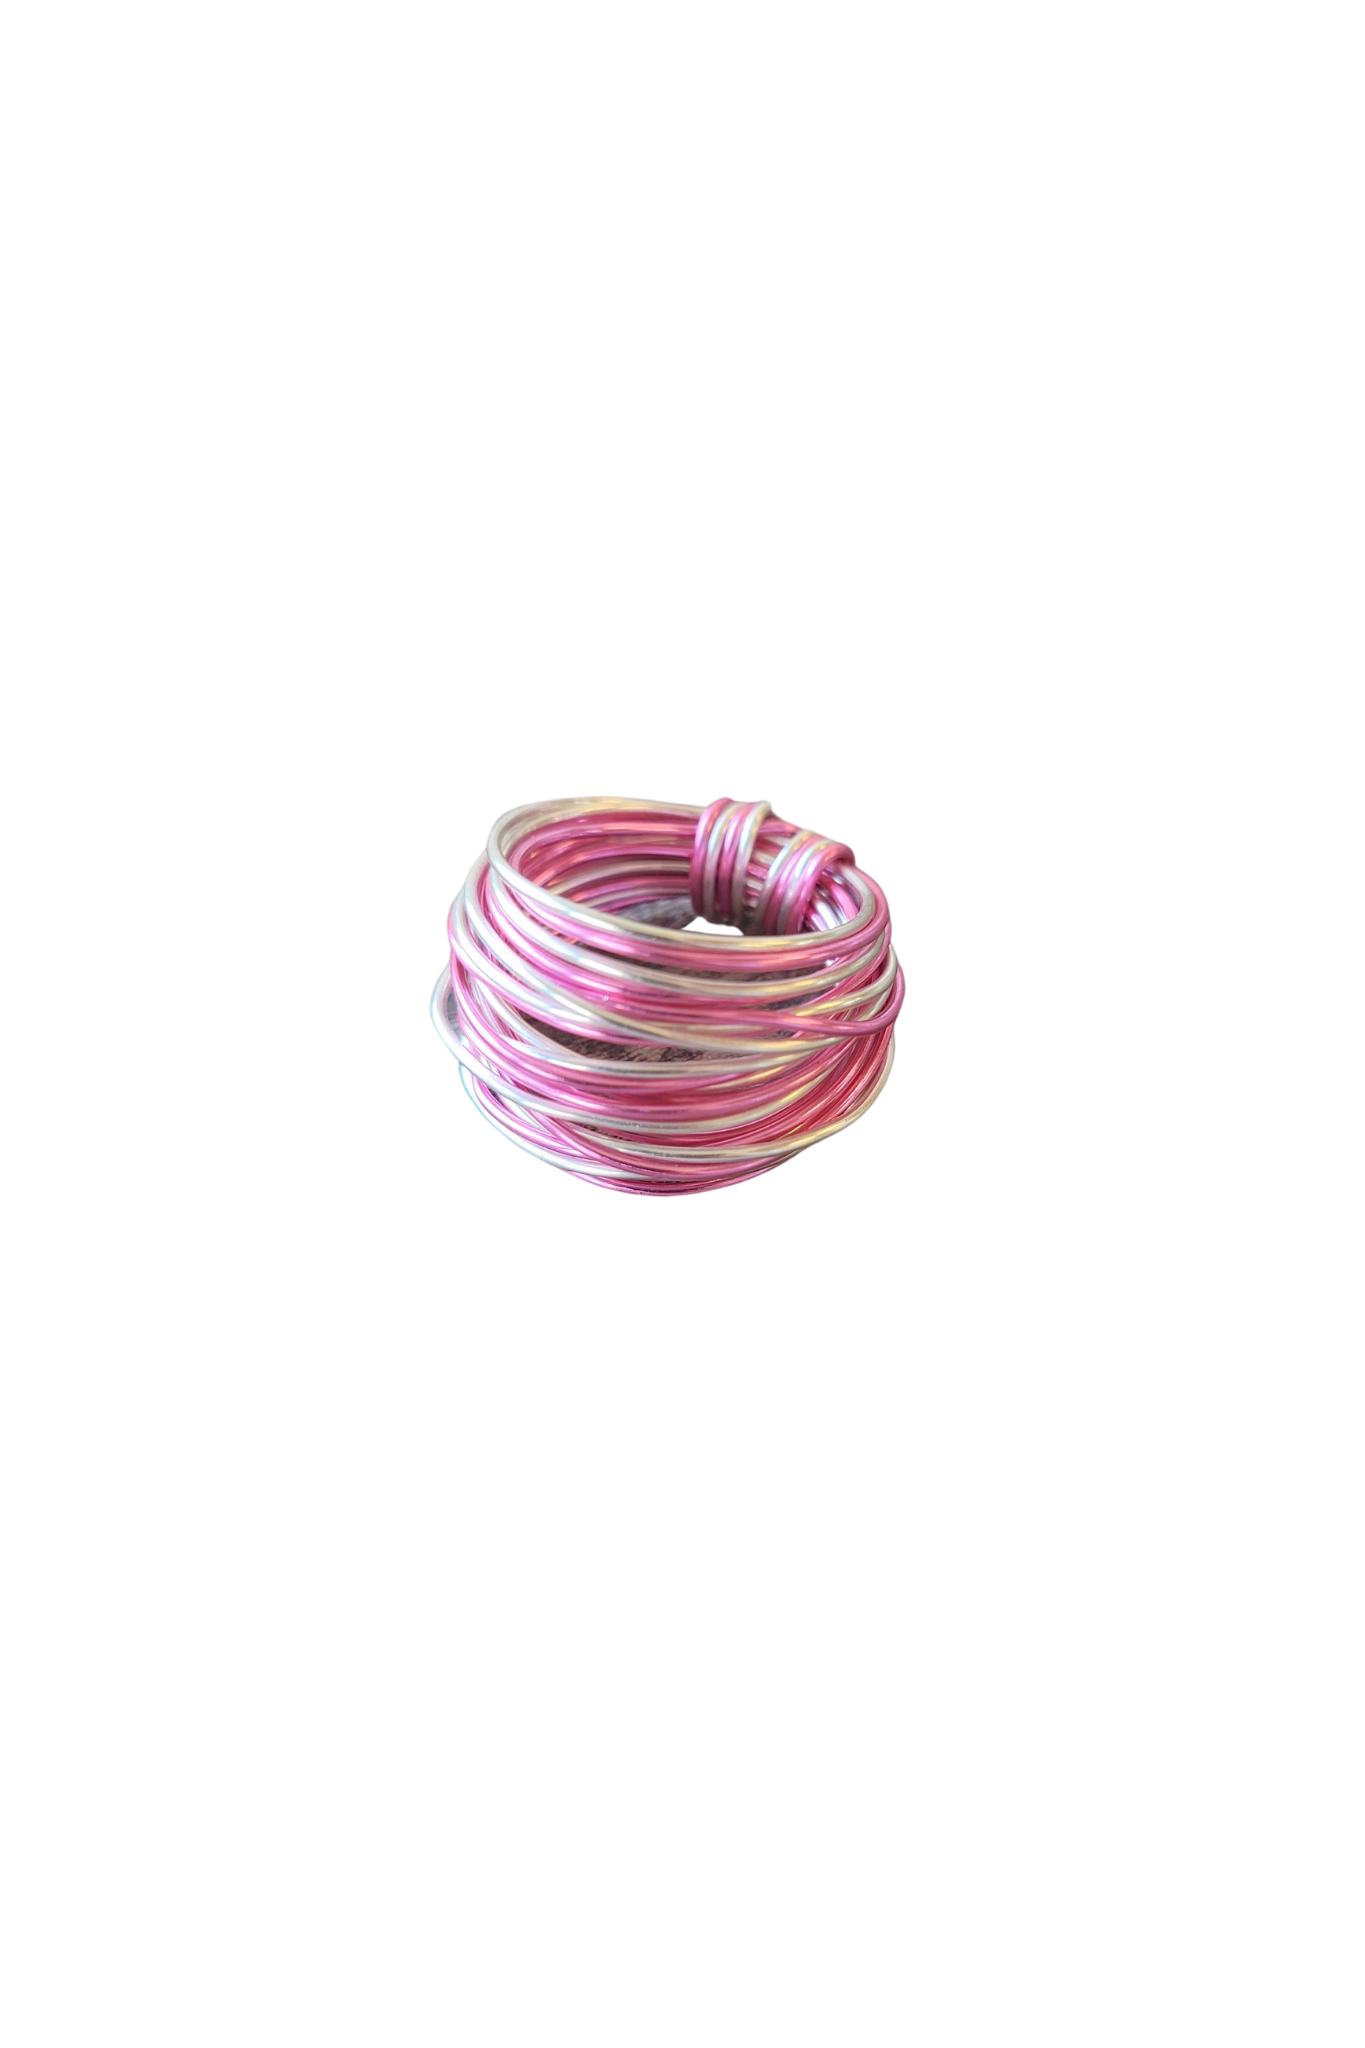 Marcia Wire Wrap Ring in Hot Pink with Silver